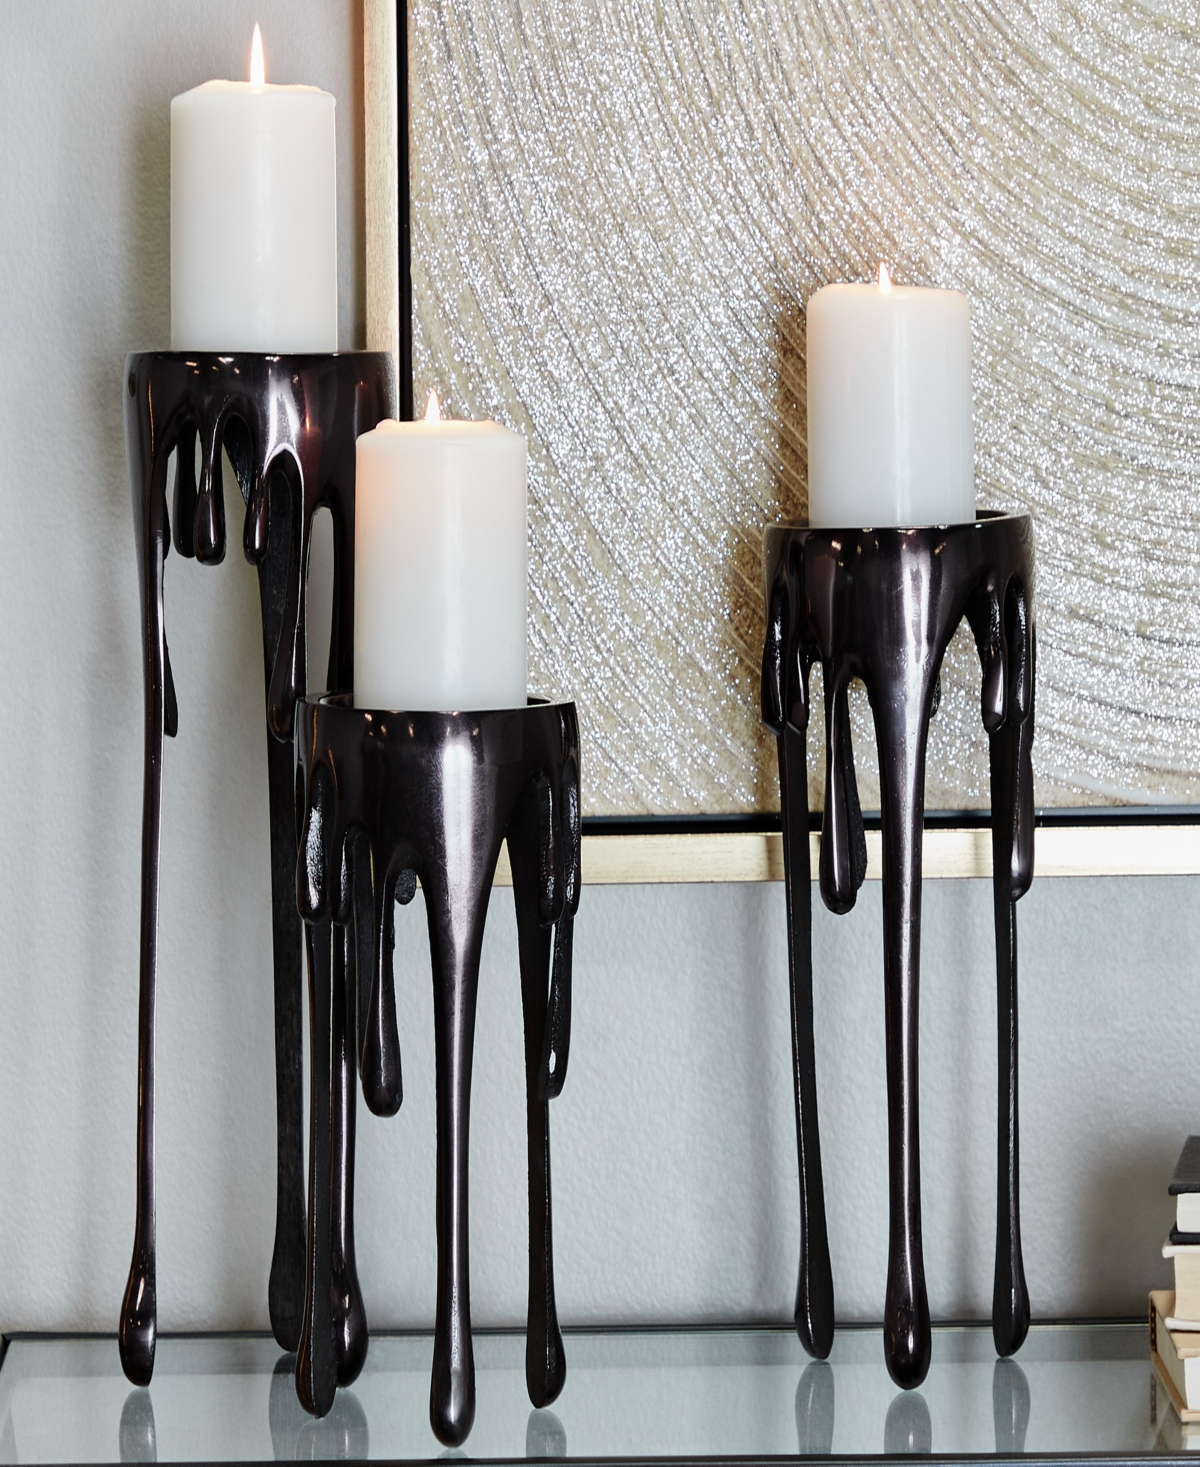 Shop Cosmoliving Aluminum Pillar Candle Holder With Dripping Melting Designed Legs Set Of 3 In Black